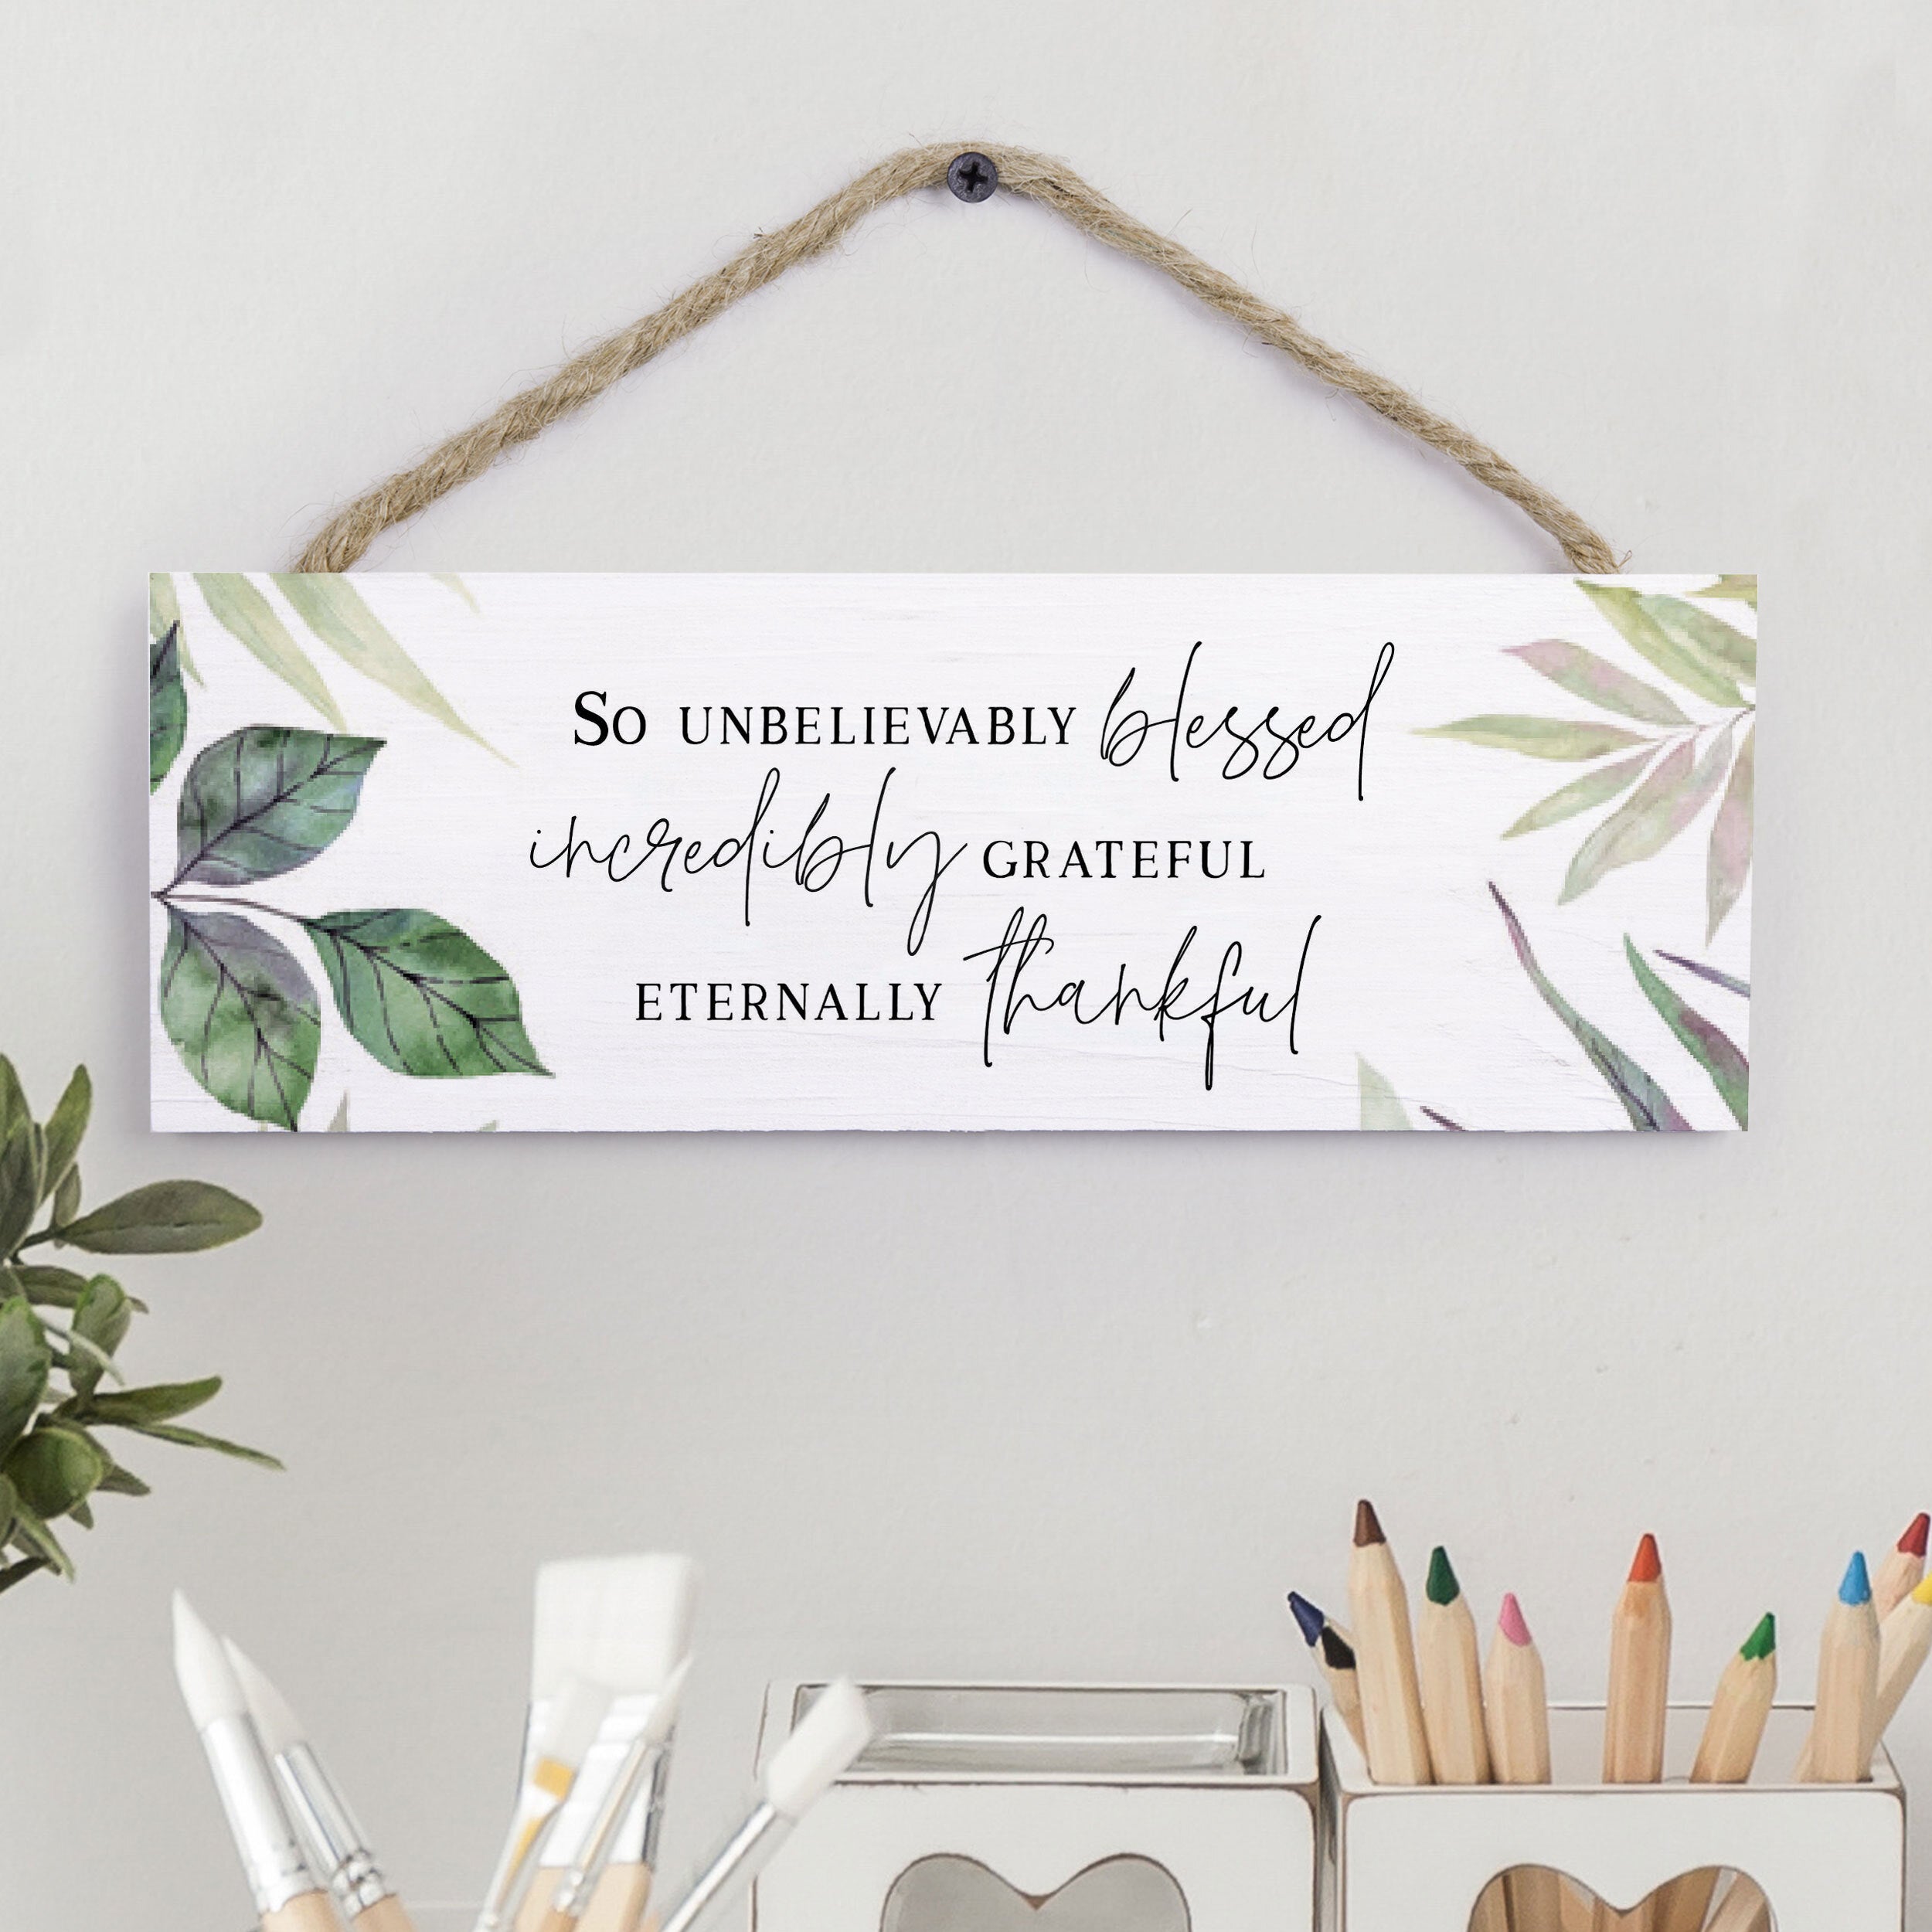 So Unbelievably Blessed Incredibly Grateful String Sign – P. Graham Dunn